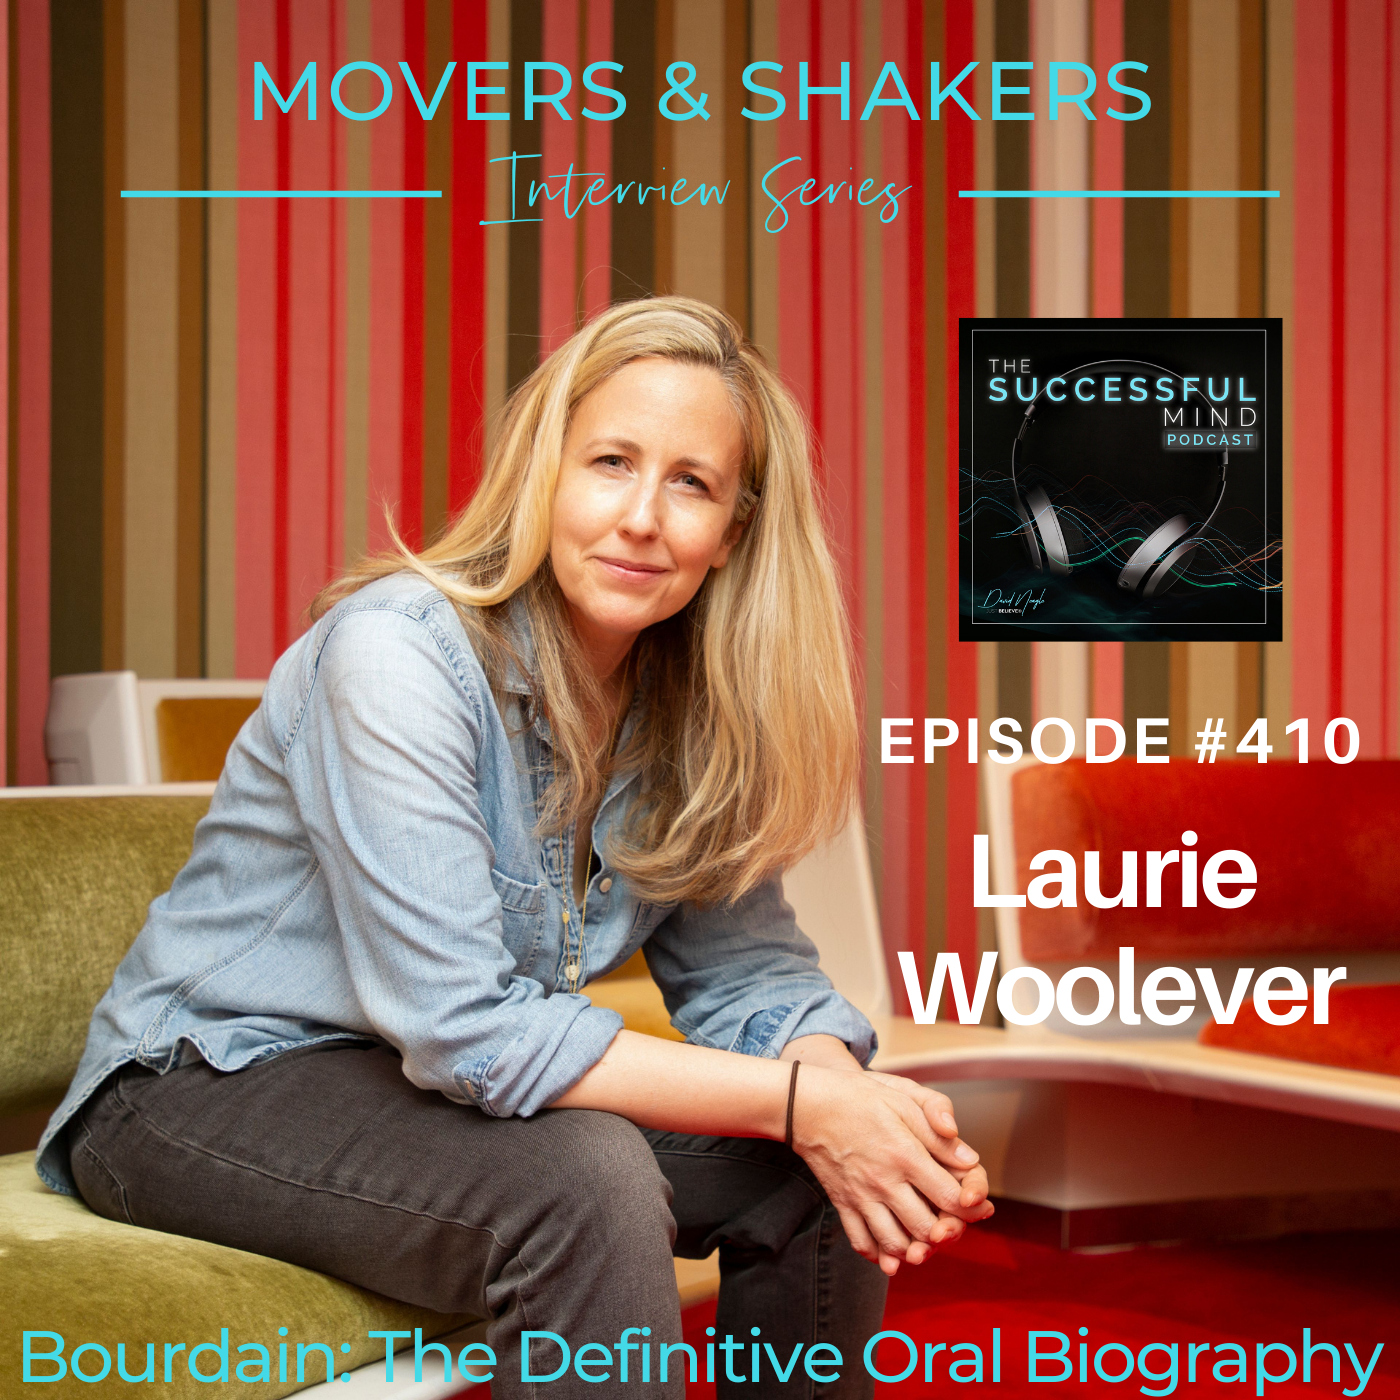 The Successful Mind Podcast - Movers & Shakers - Laurie Woolever